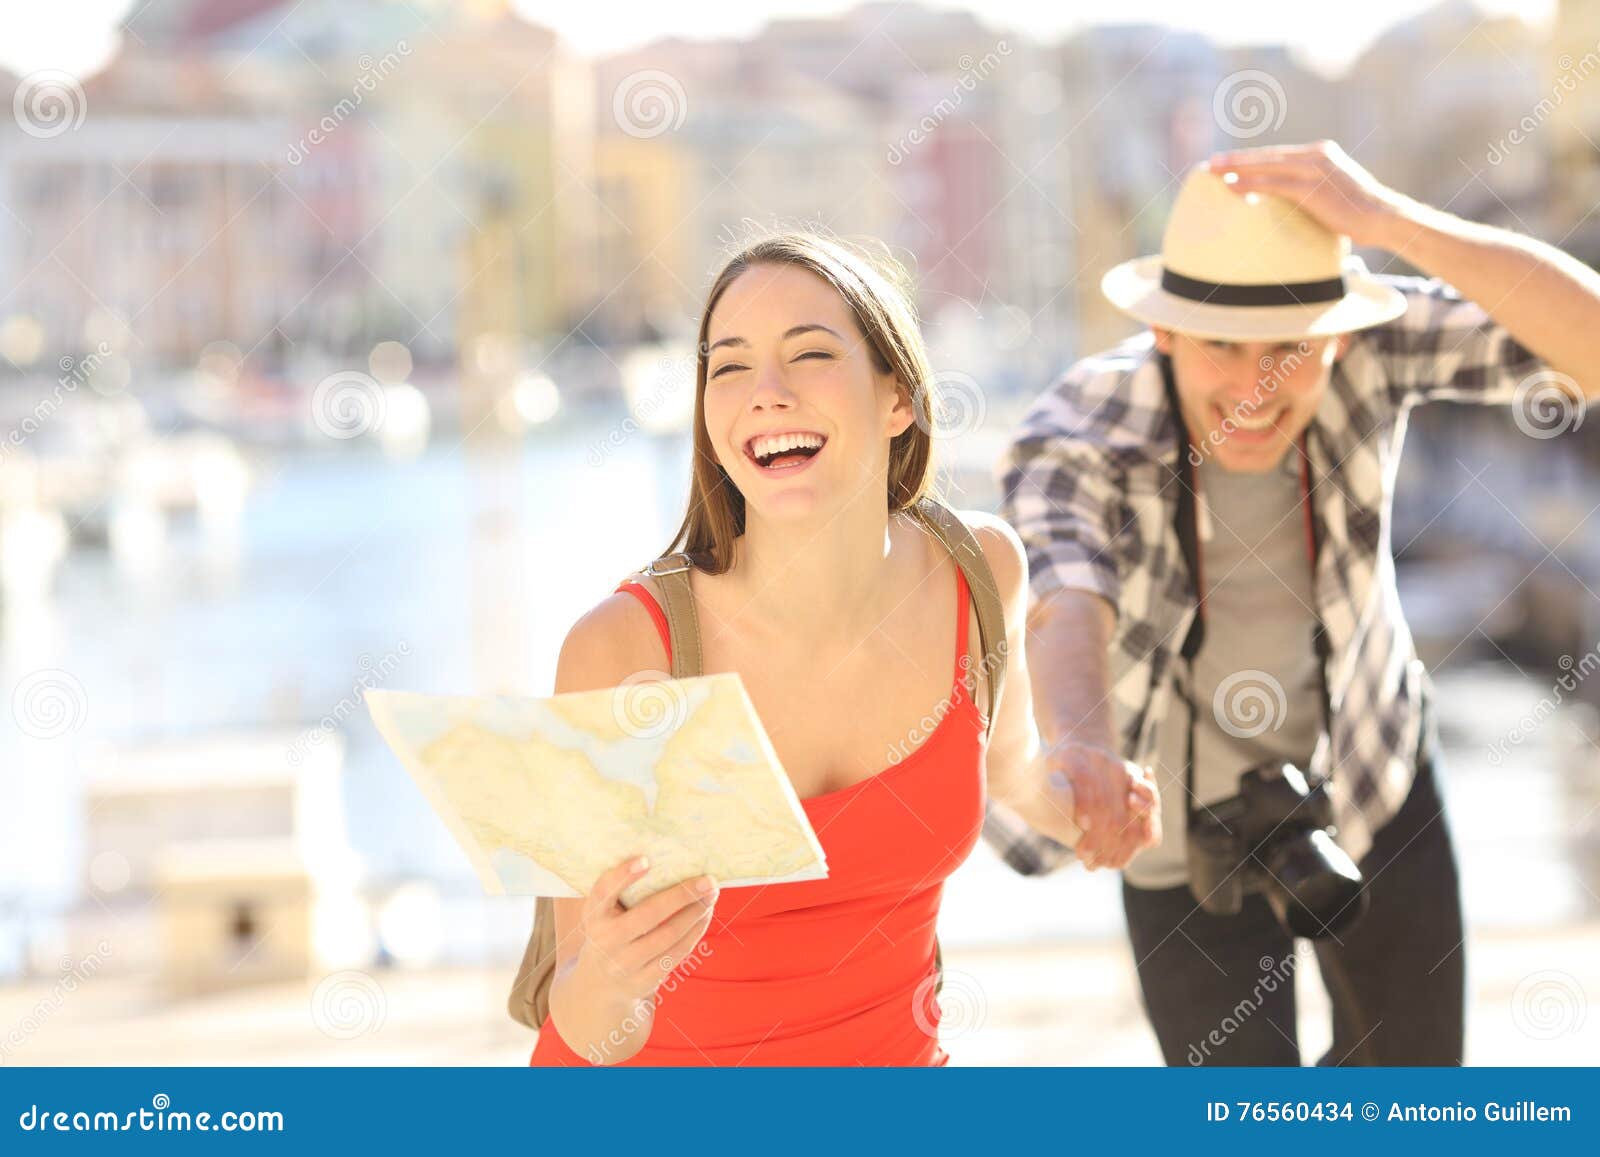 couple of tourists running in travel destination